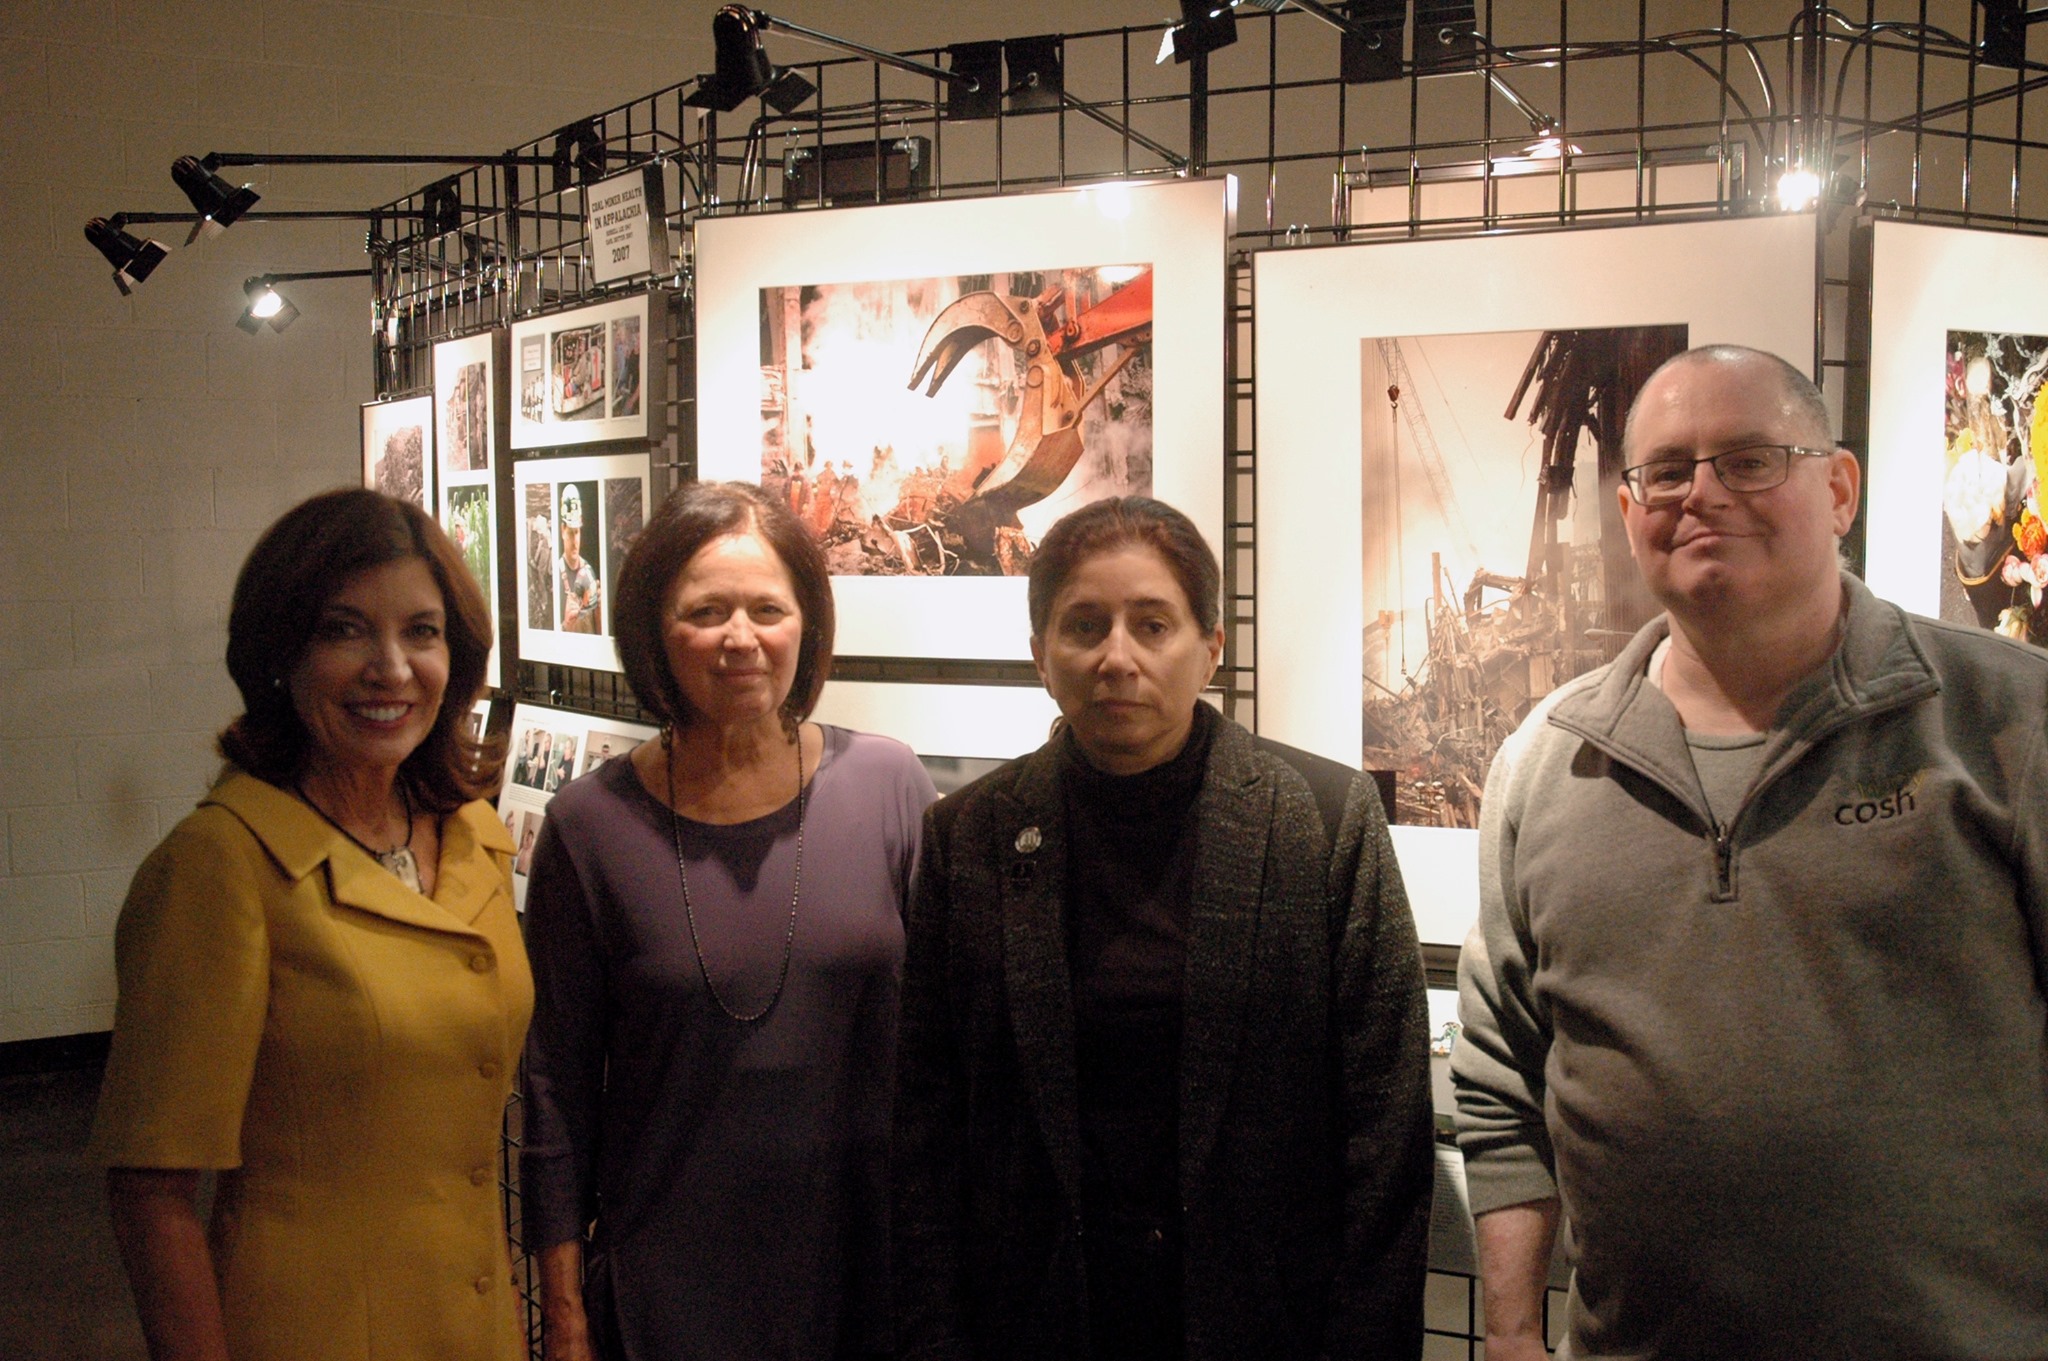 Four people pose in front of a photo exhibit